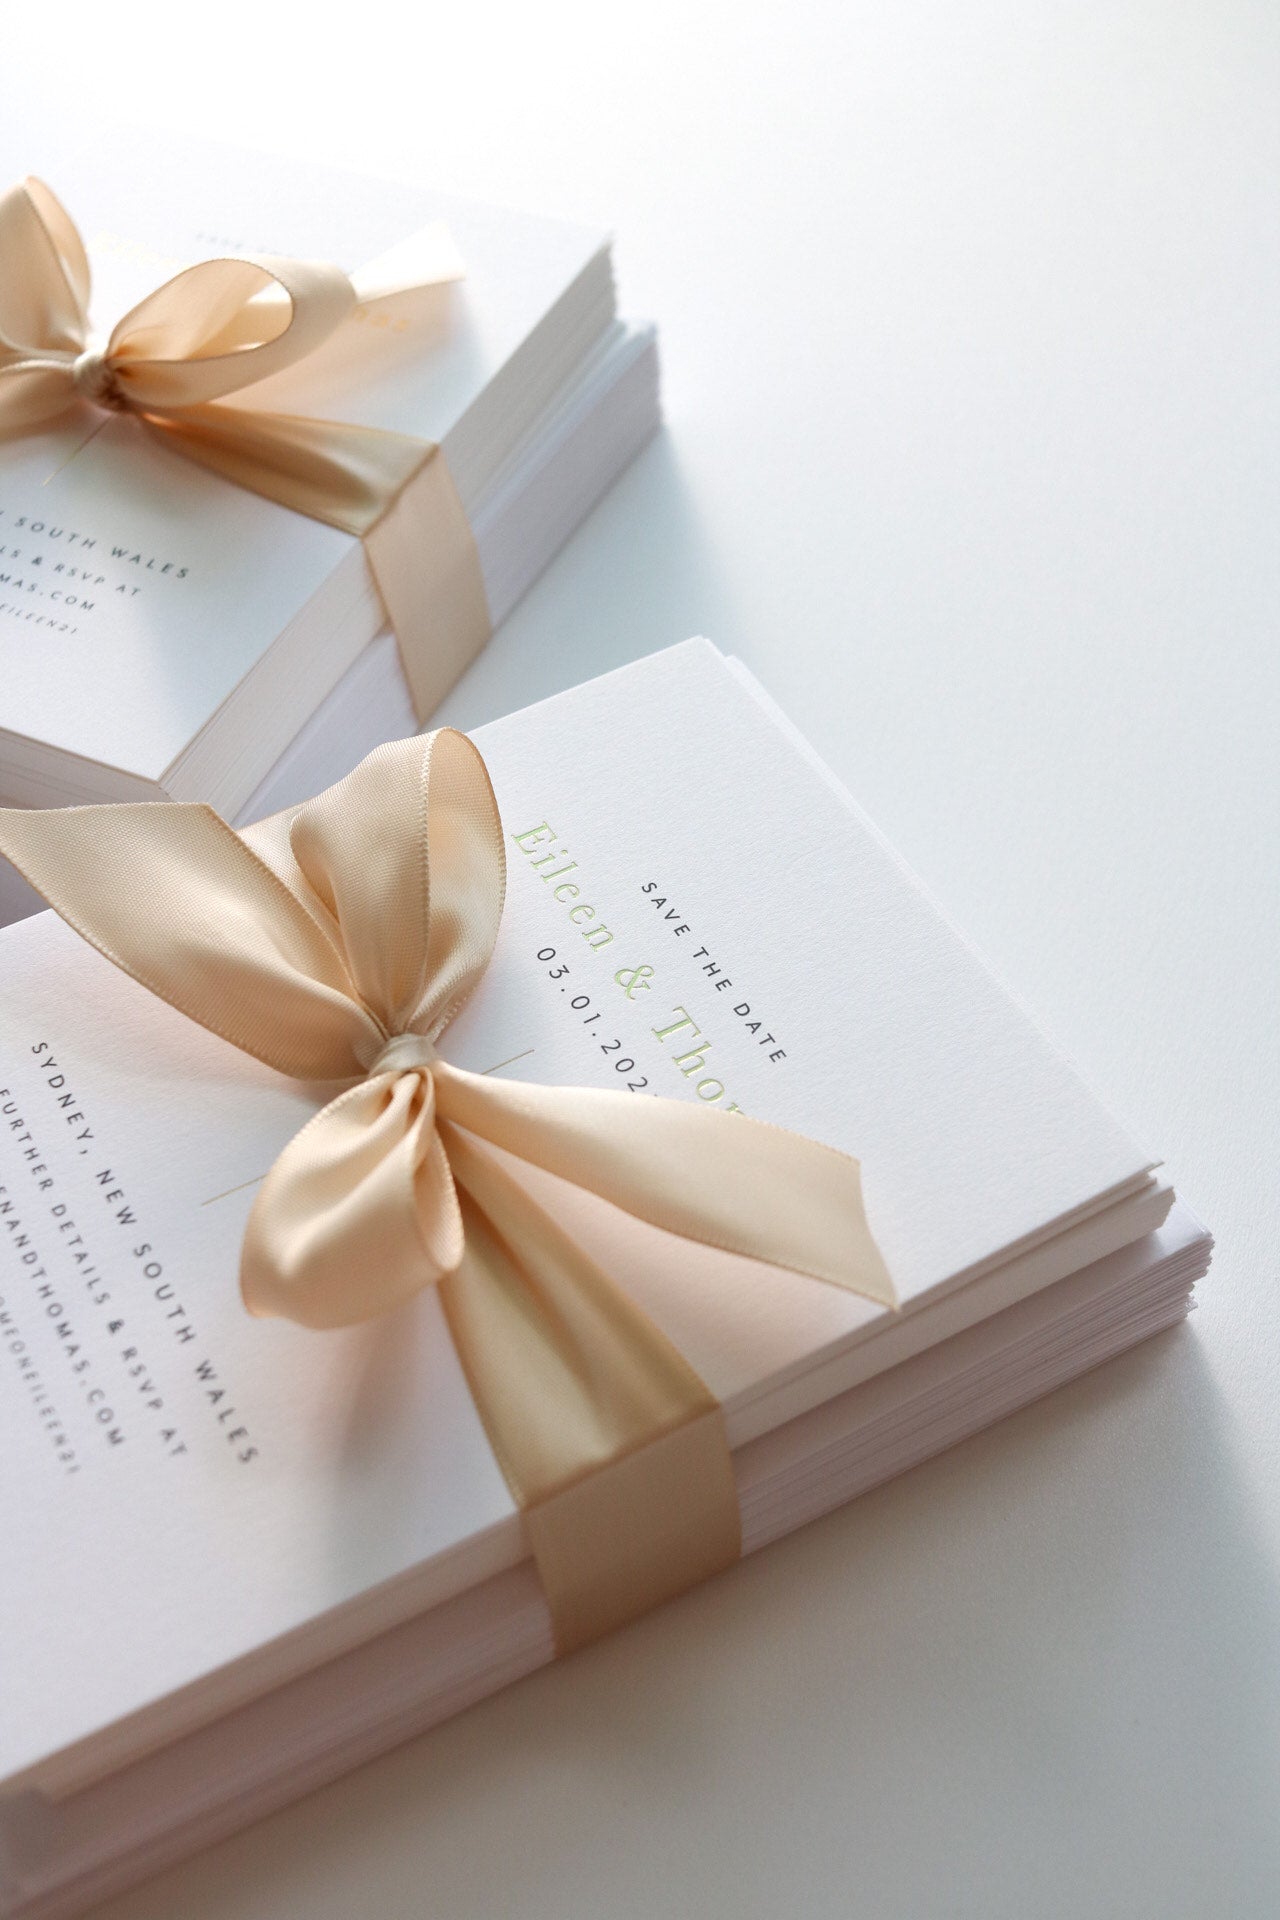 A MOMENT WITH LAURA ELIZABETH DESIGN - Everything you need to know about wedding invitations, including how to (politely) uninvite guests due to COVID restrictions